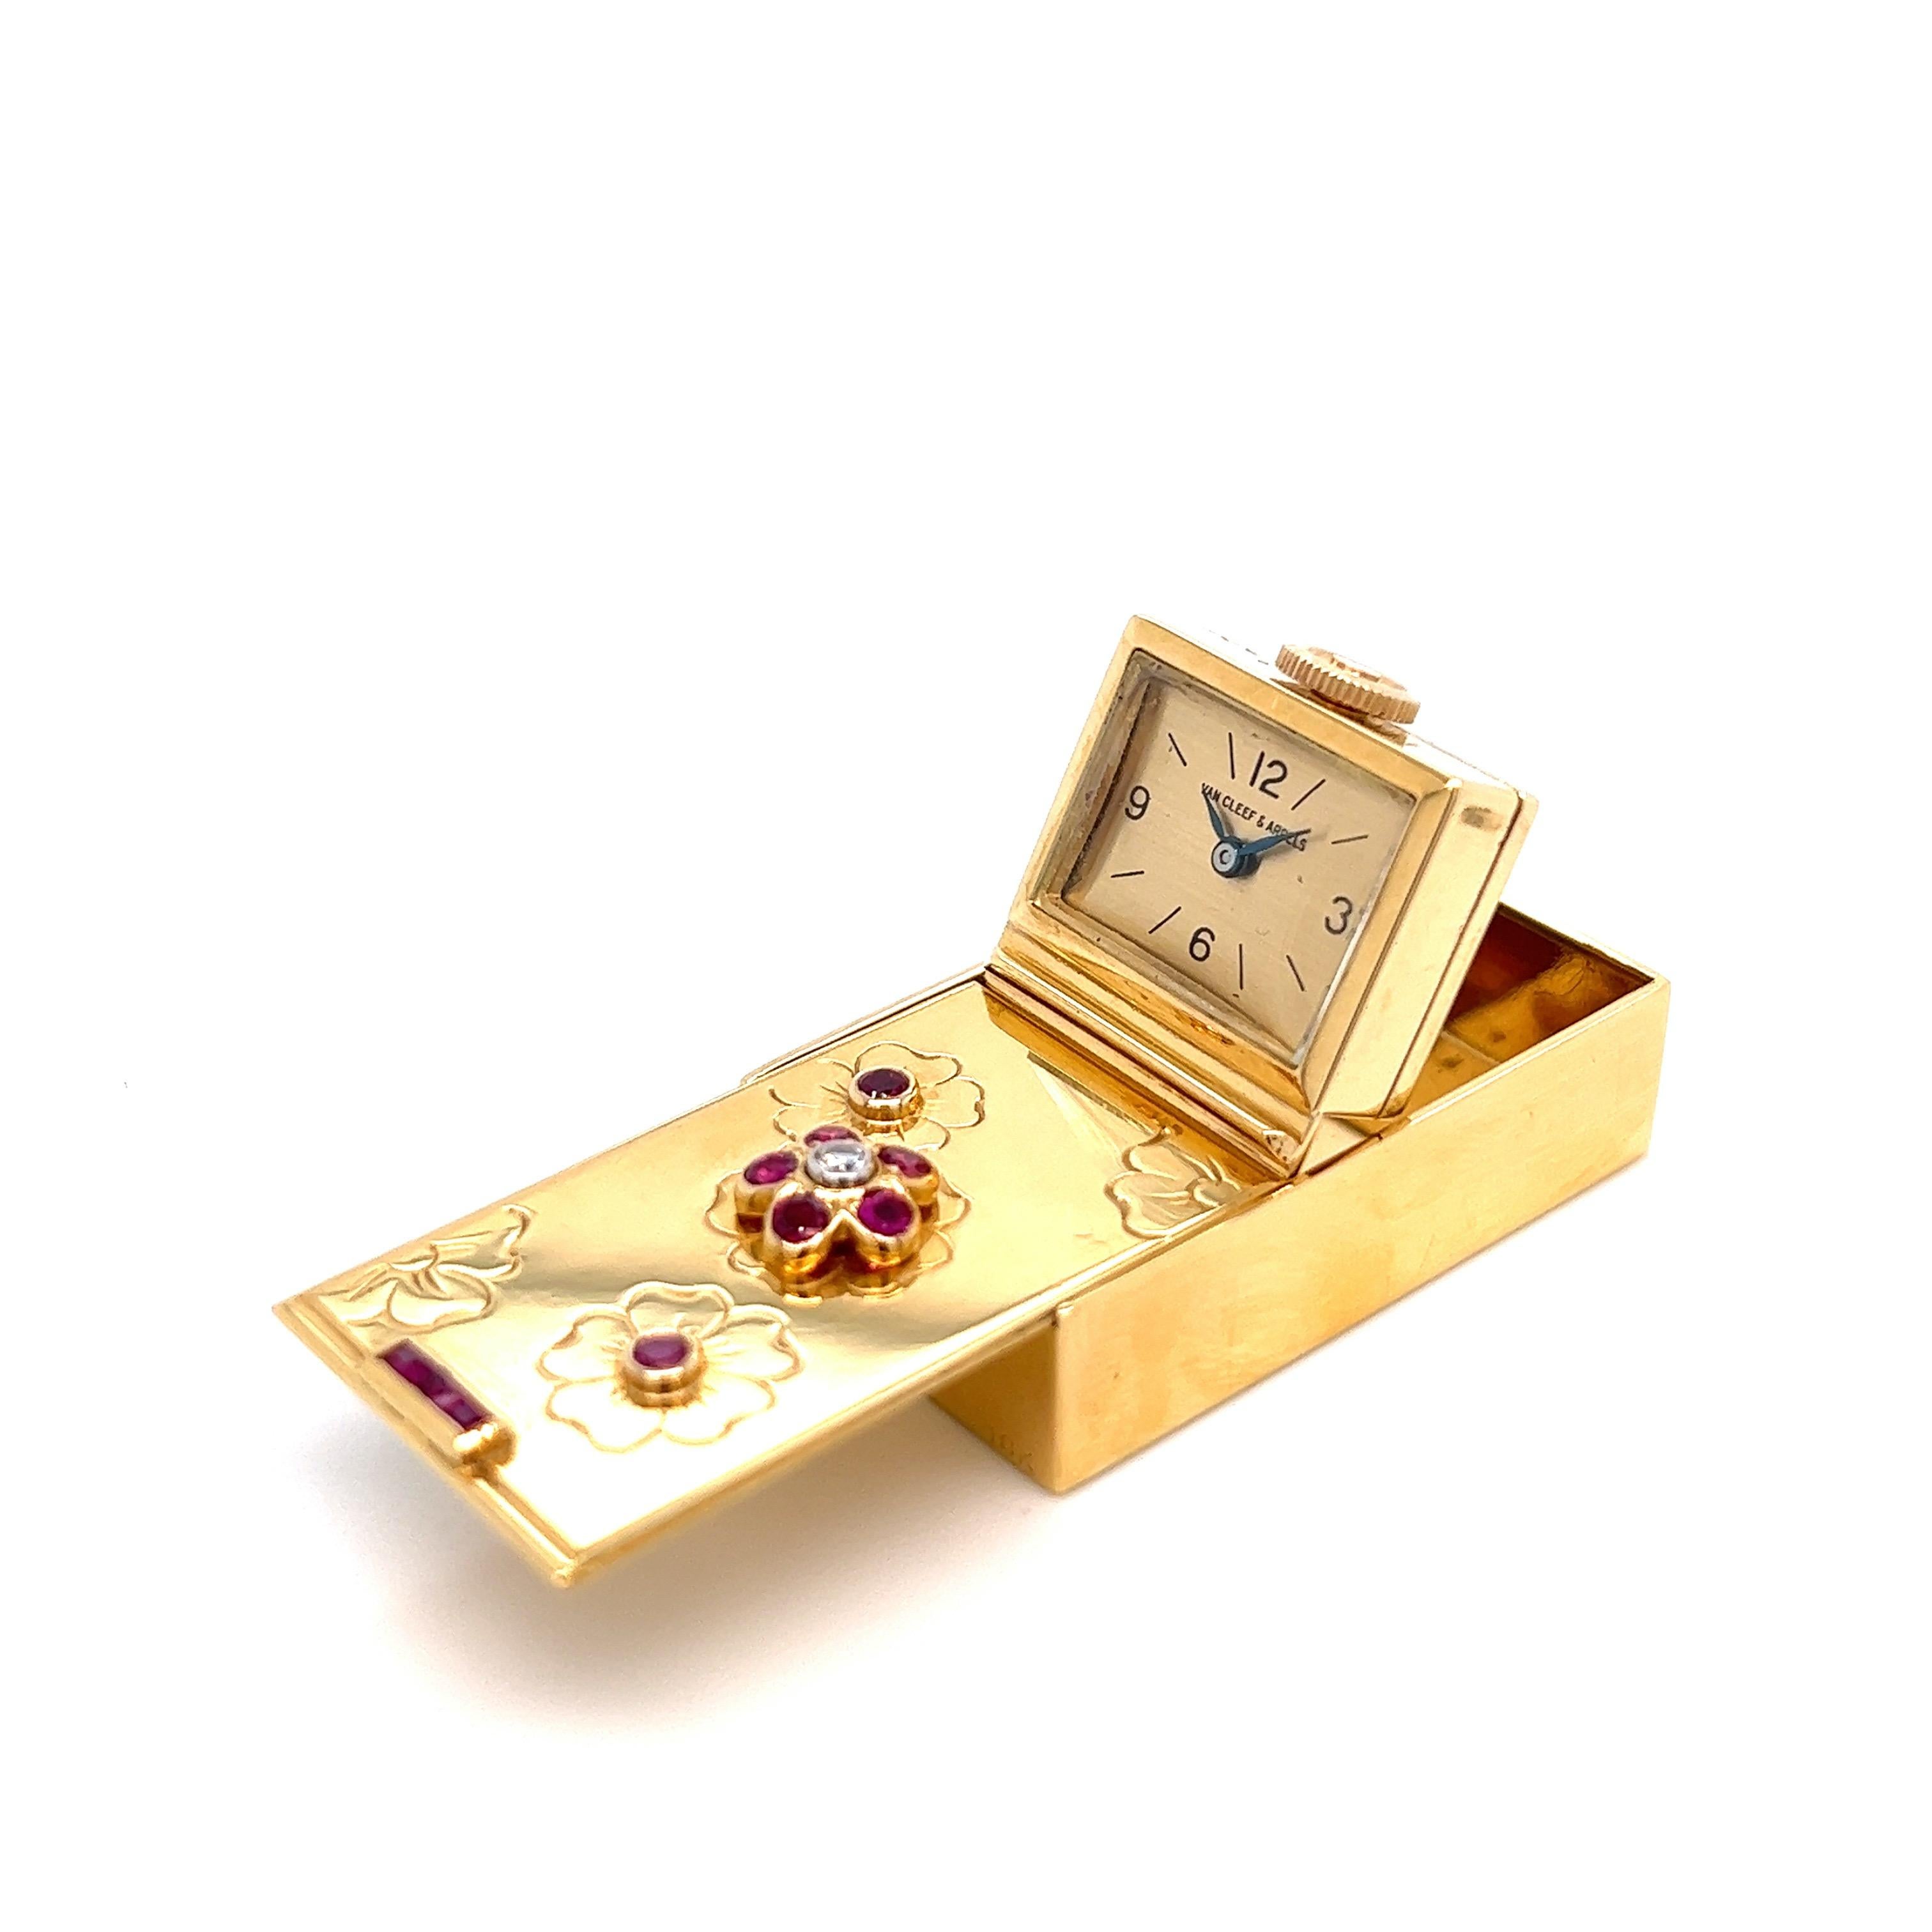 Van Cleef & Arpels 1940s Gold Travel Clock In Excellent Condition For Sale In New York, NY